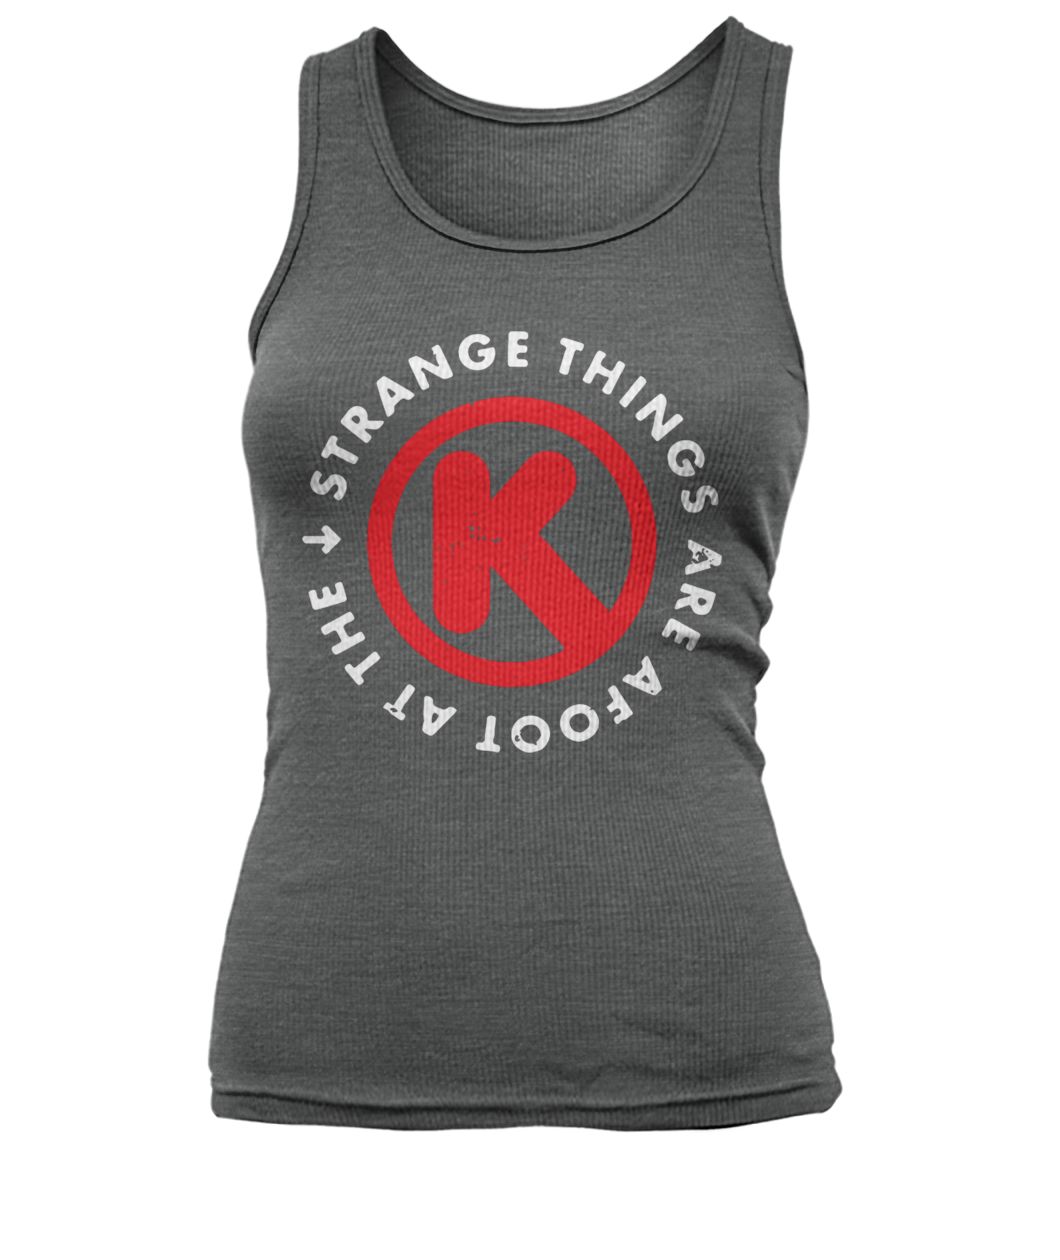 Strange things are afoot at the circle-k women's tank top